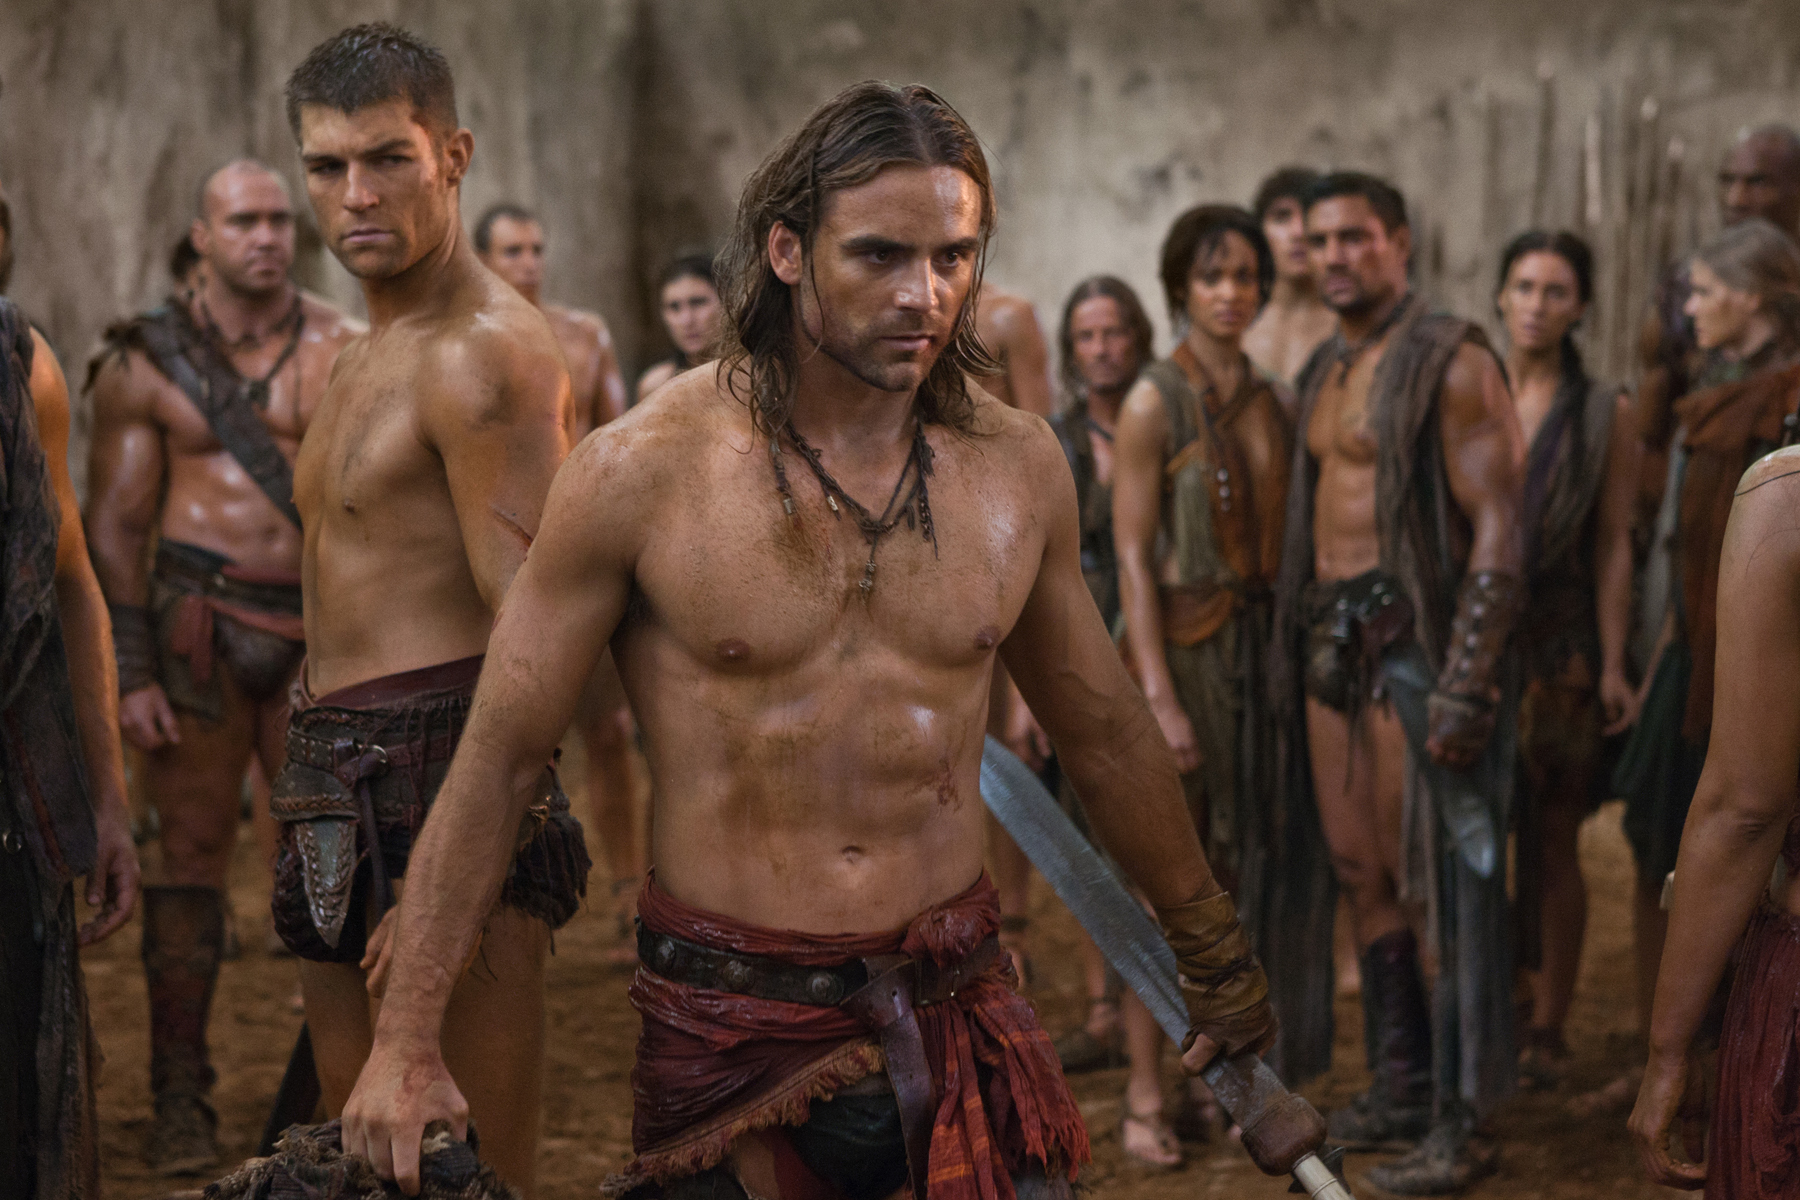 Still of Manu Bennett, Cynthia Addai-Robinson, Dustin Clare and Liam McIntyre in Spartacus: Blood and Sand (2010)